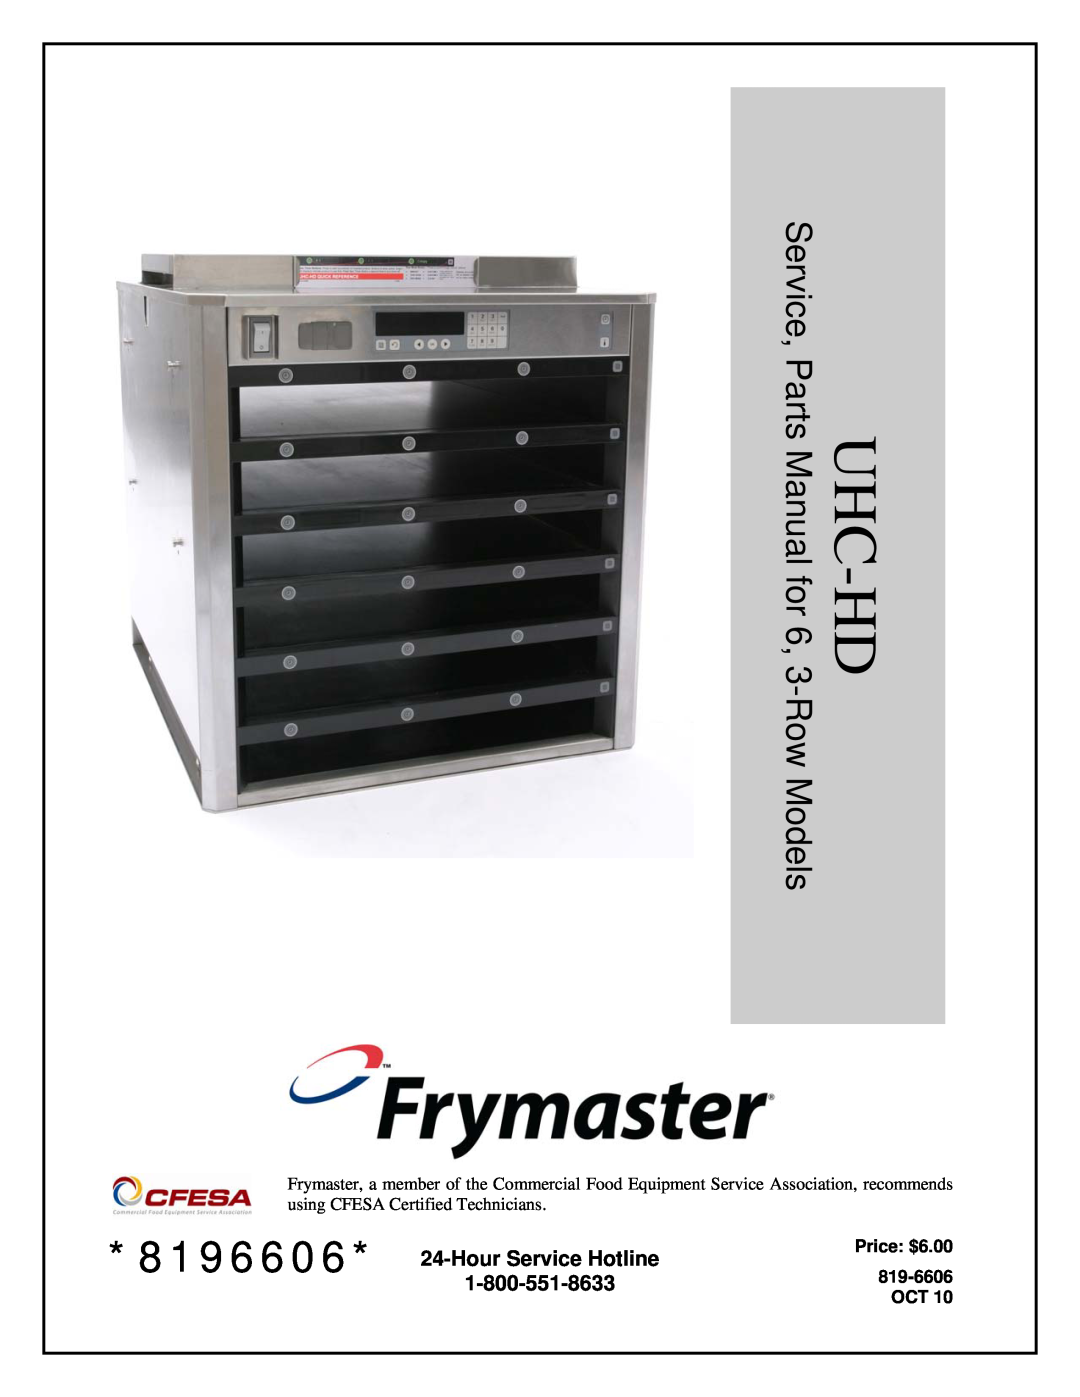 Frymaster UHC-HD manual 8196606* 24-Hour Service Hotline, Service, Parts Manual, for, Row Models, Price $6.00 